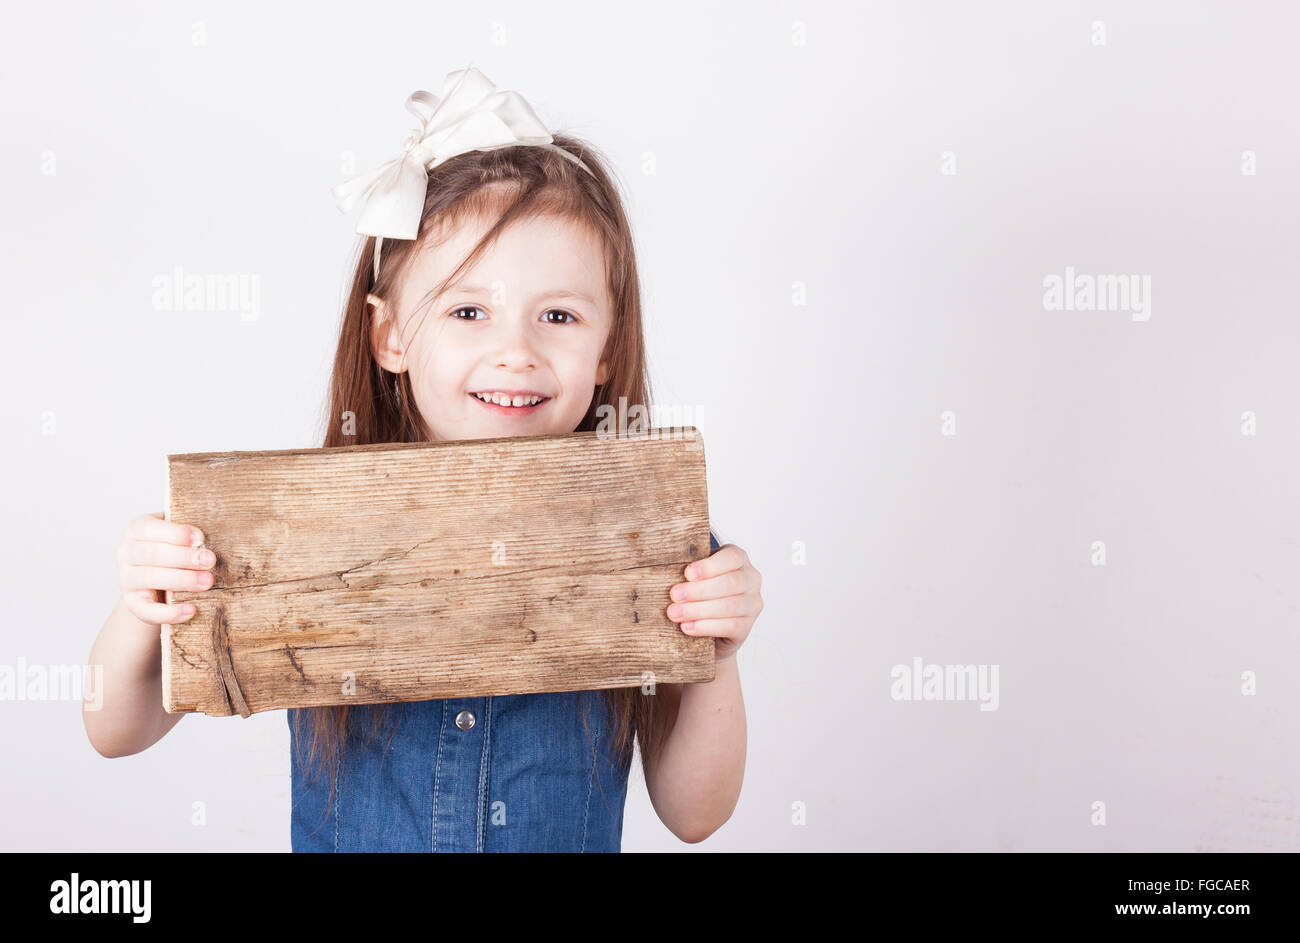 young girl, empty wooden board in hands, white background Stock Photo